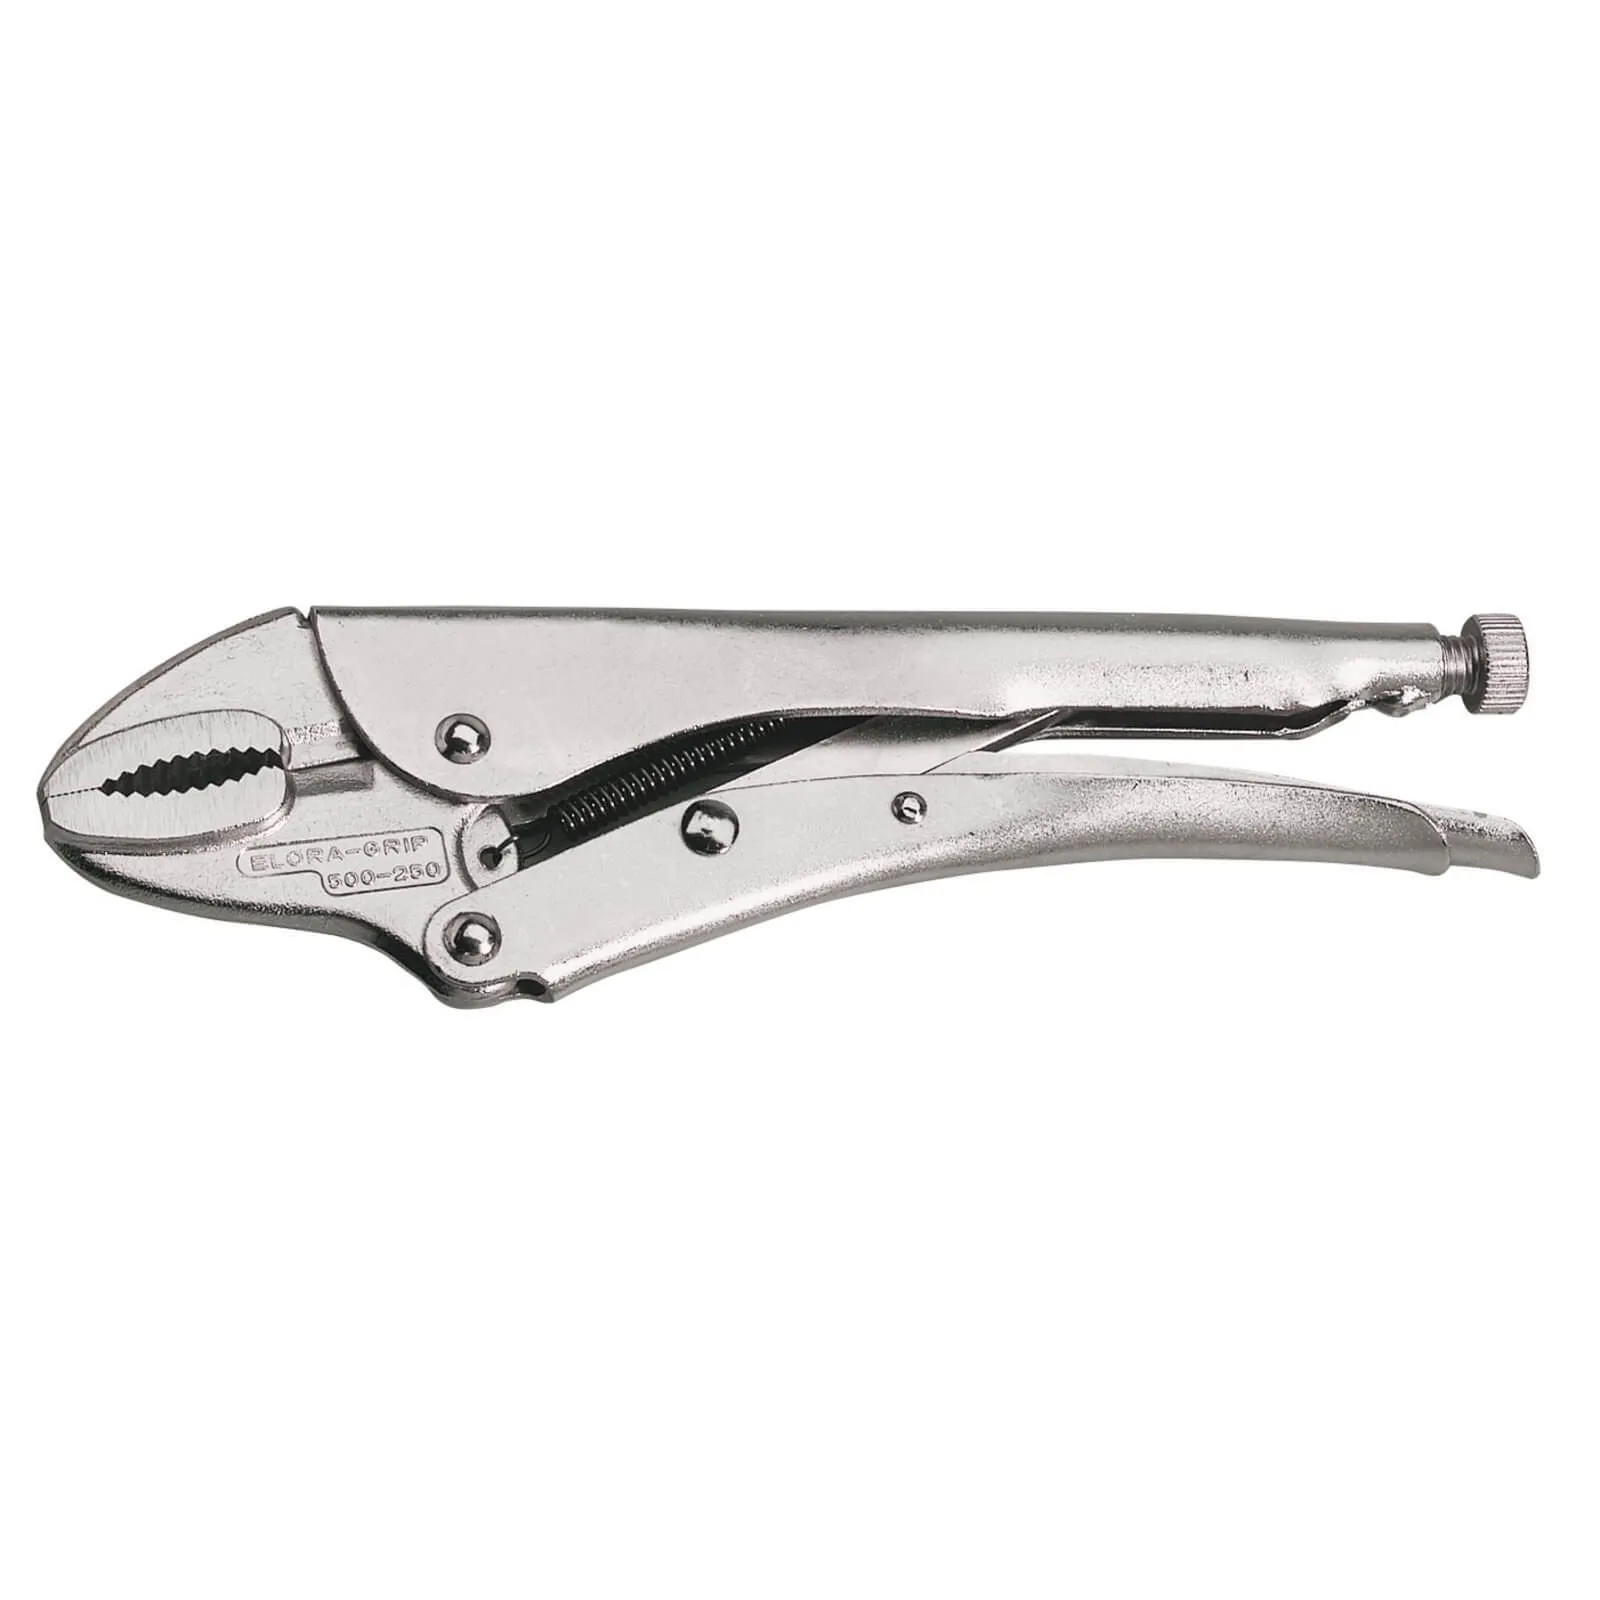 Elora Curved Jaw Self Grip Pliers - 250mm